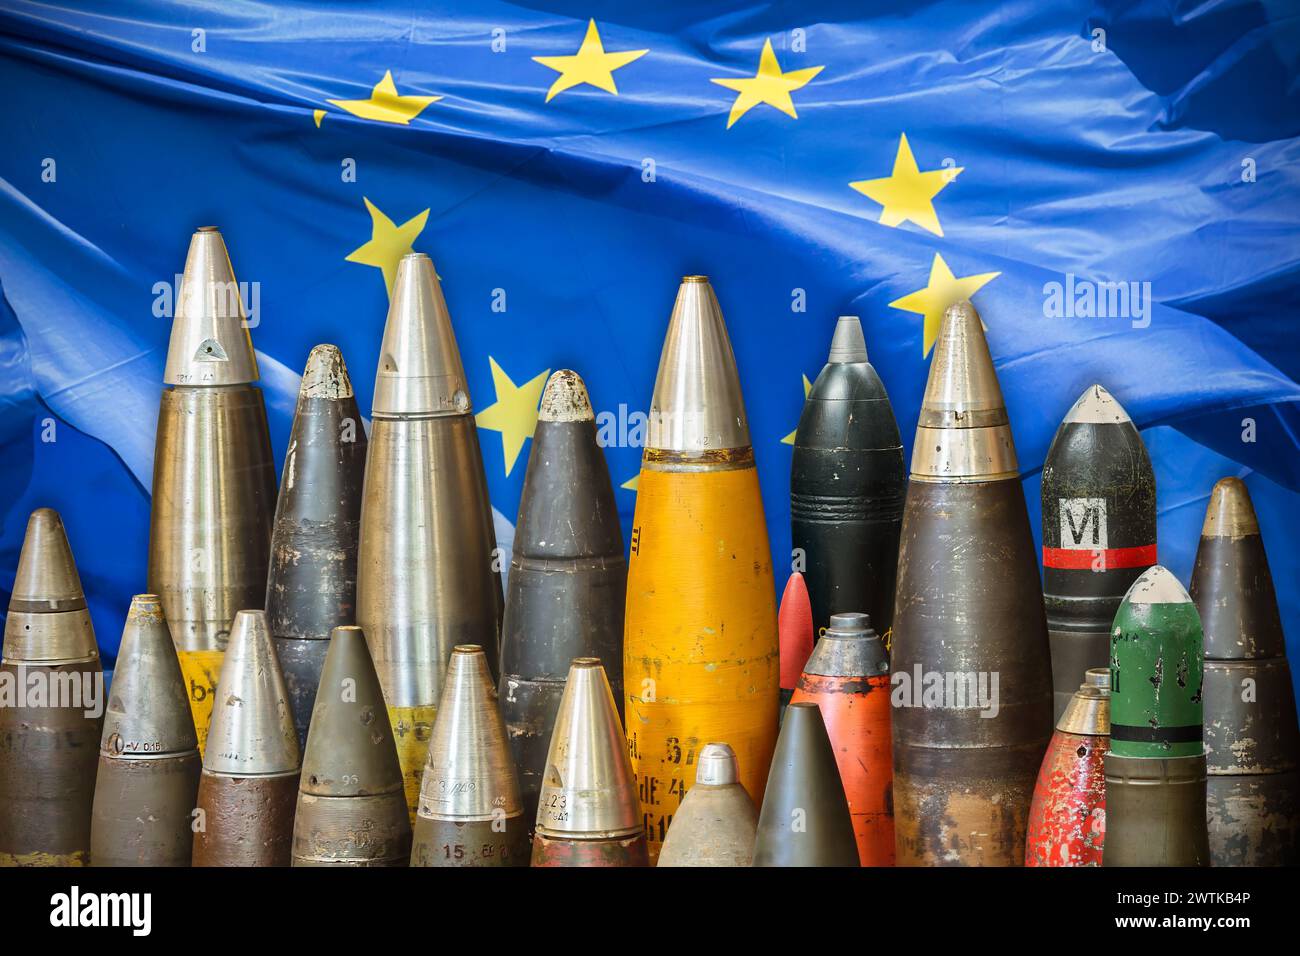 Military bombs and ammunition in front of a waving European Union flag Stock Photo